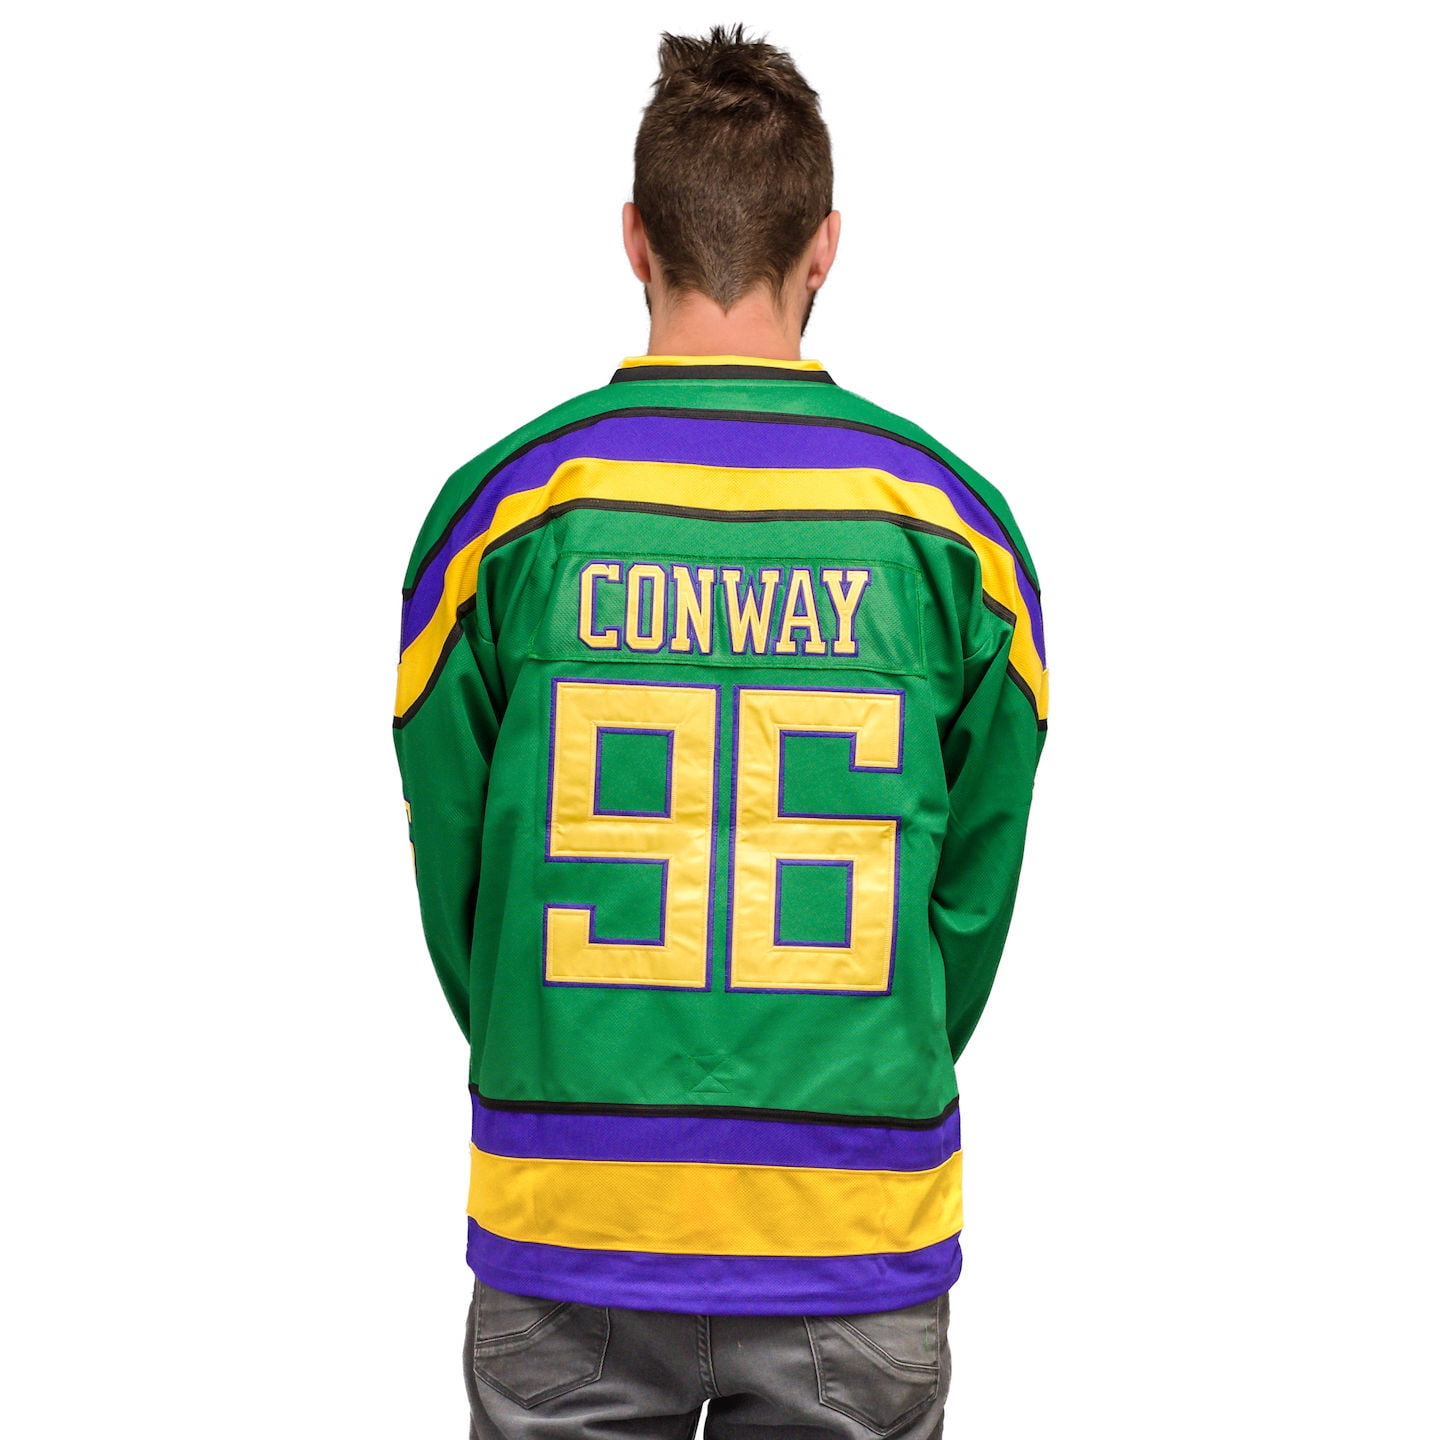 The Mighty Ducks #96 Charlie Conway Replica Hockey Jersey Green